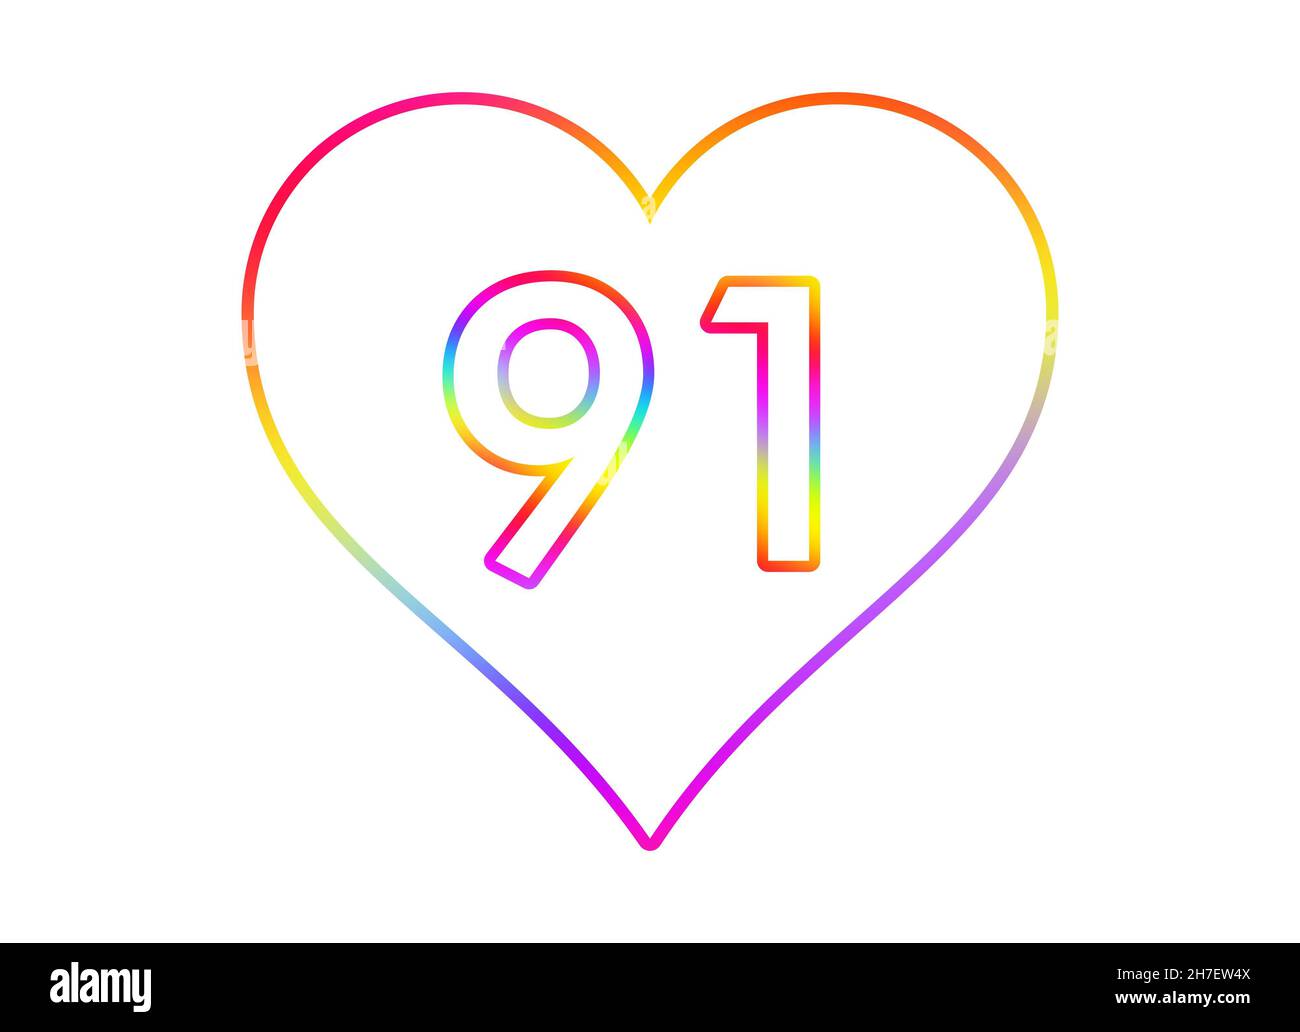 number-91-into-a-white-heart-with-rainbow-color-outline-2H7EW4X.jpg